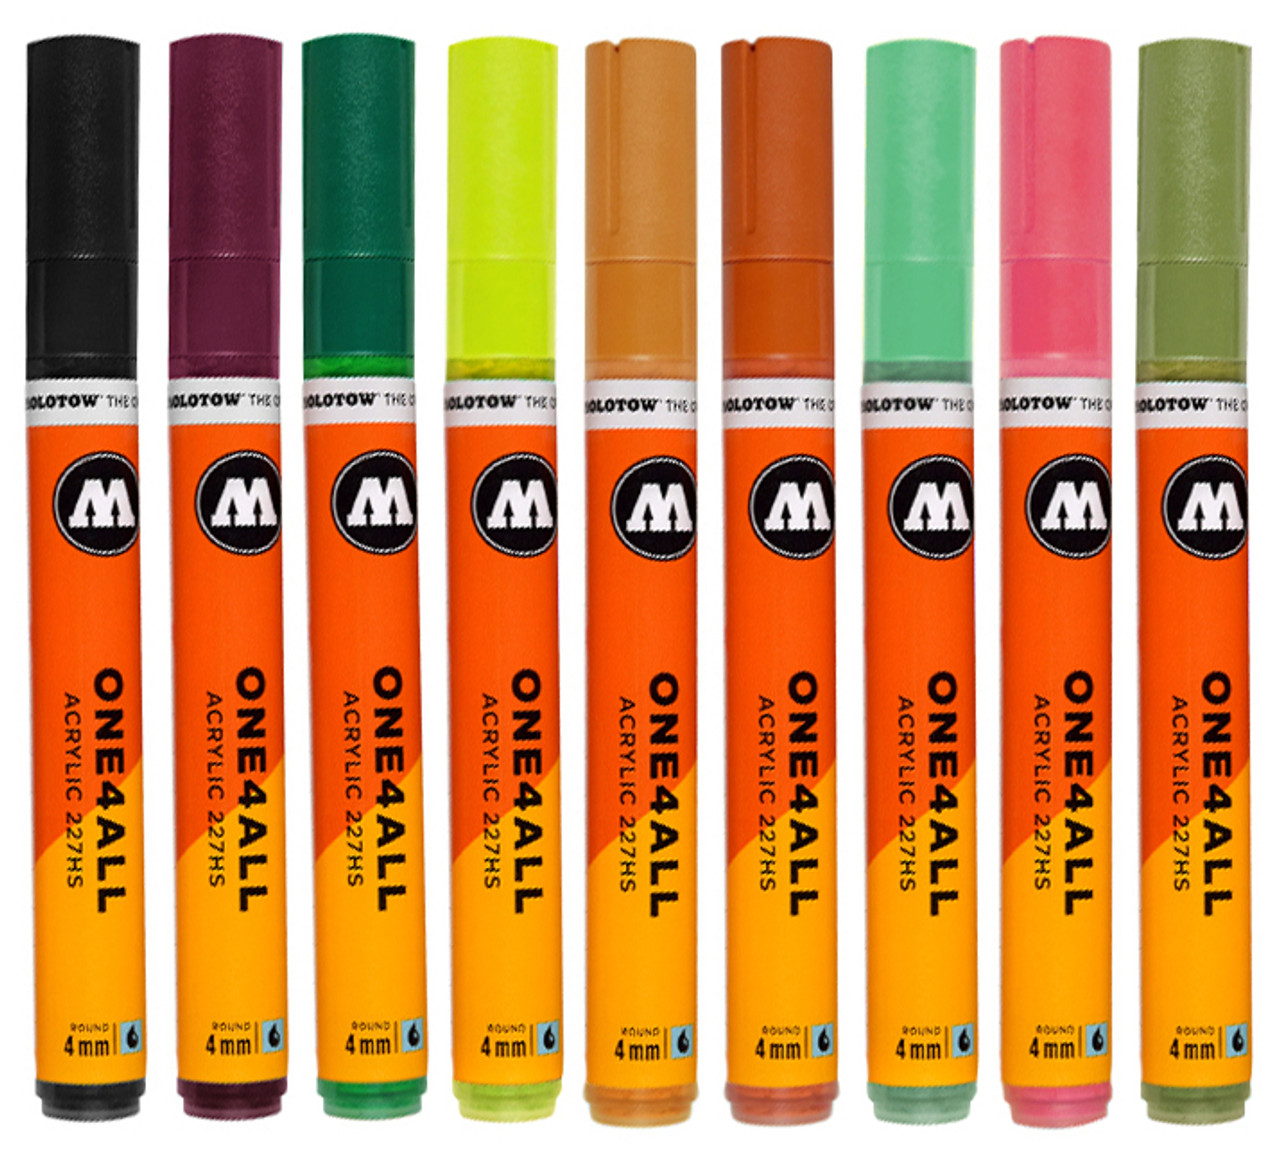 Molotow UK One4All Acrylic Marker Collection